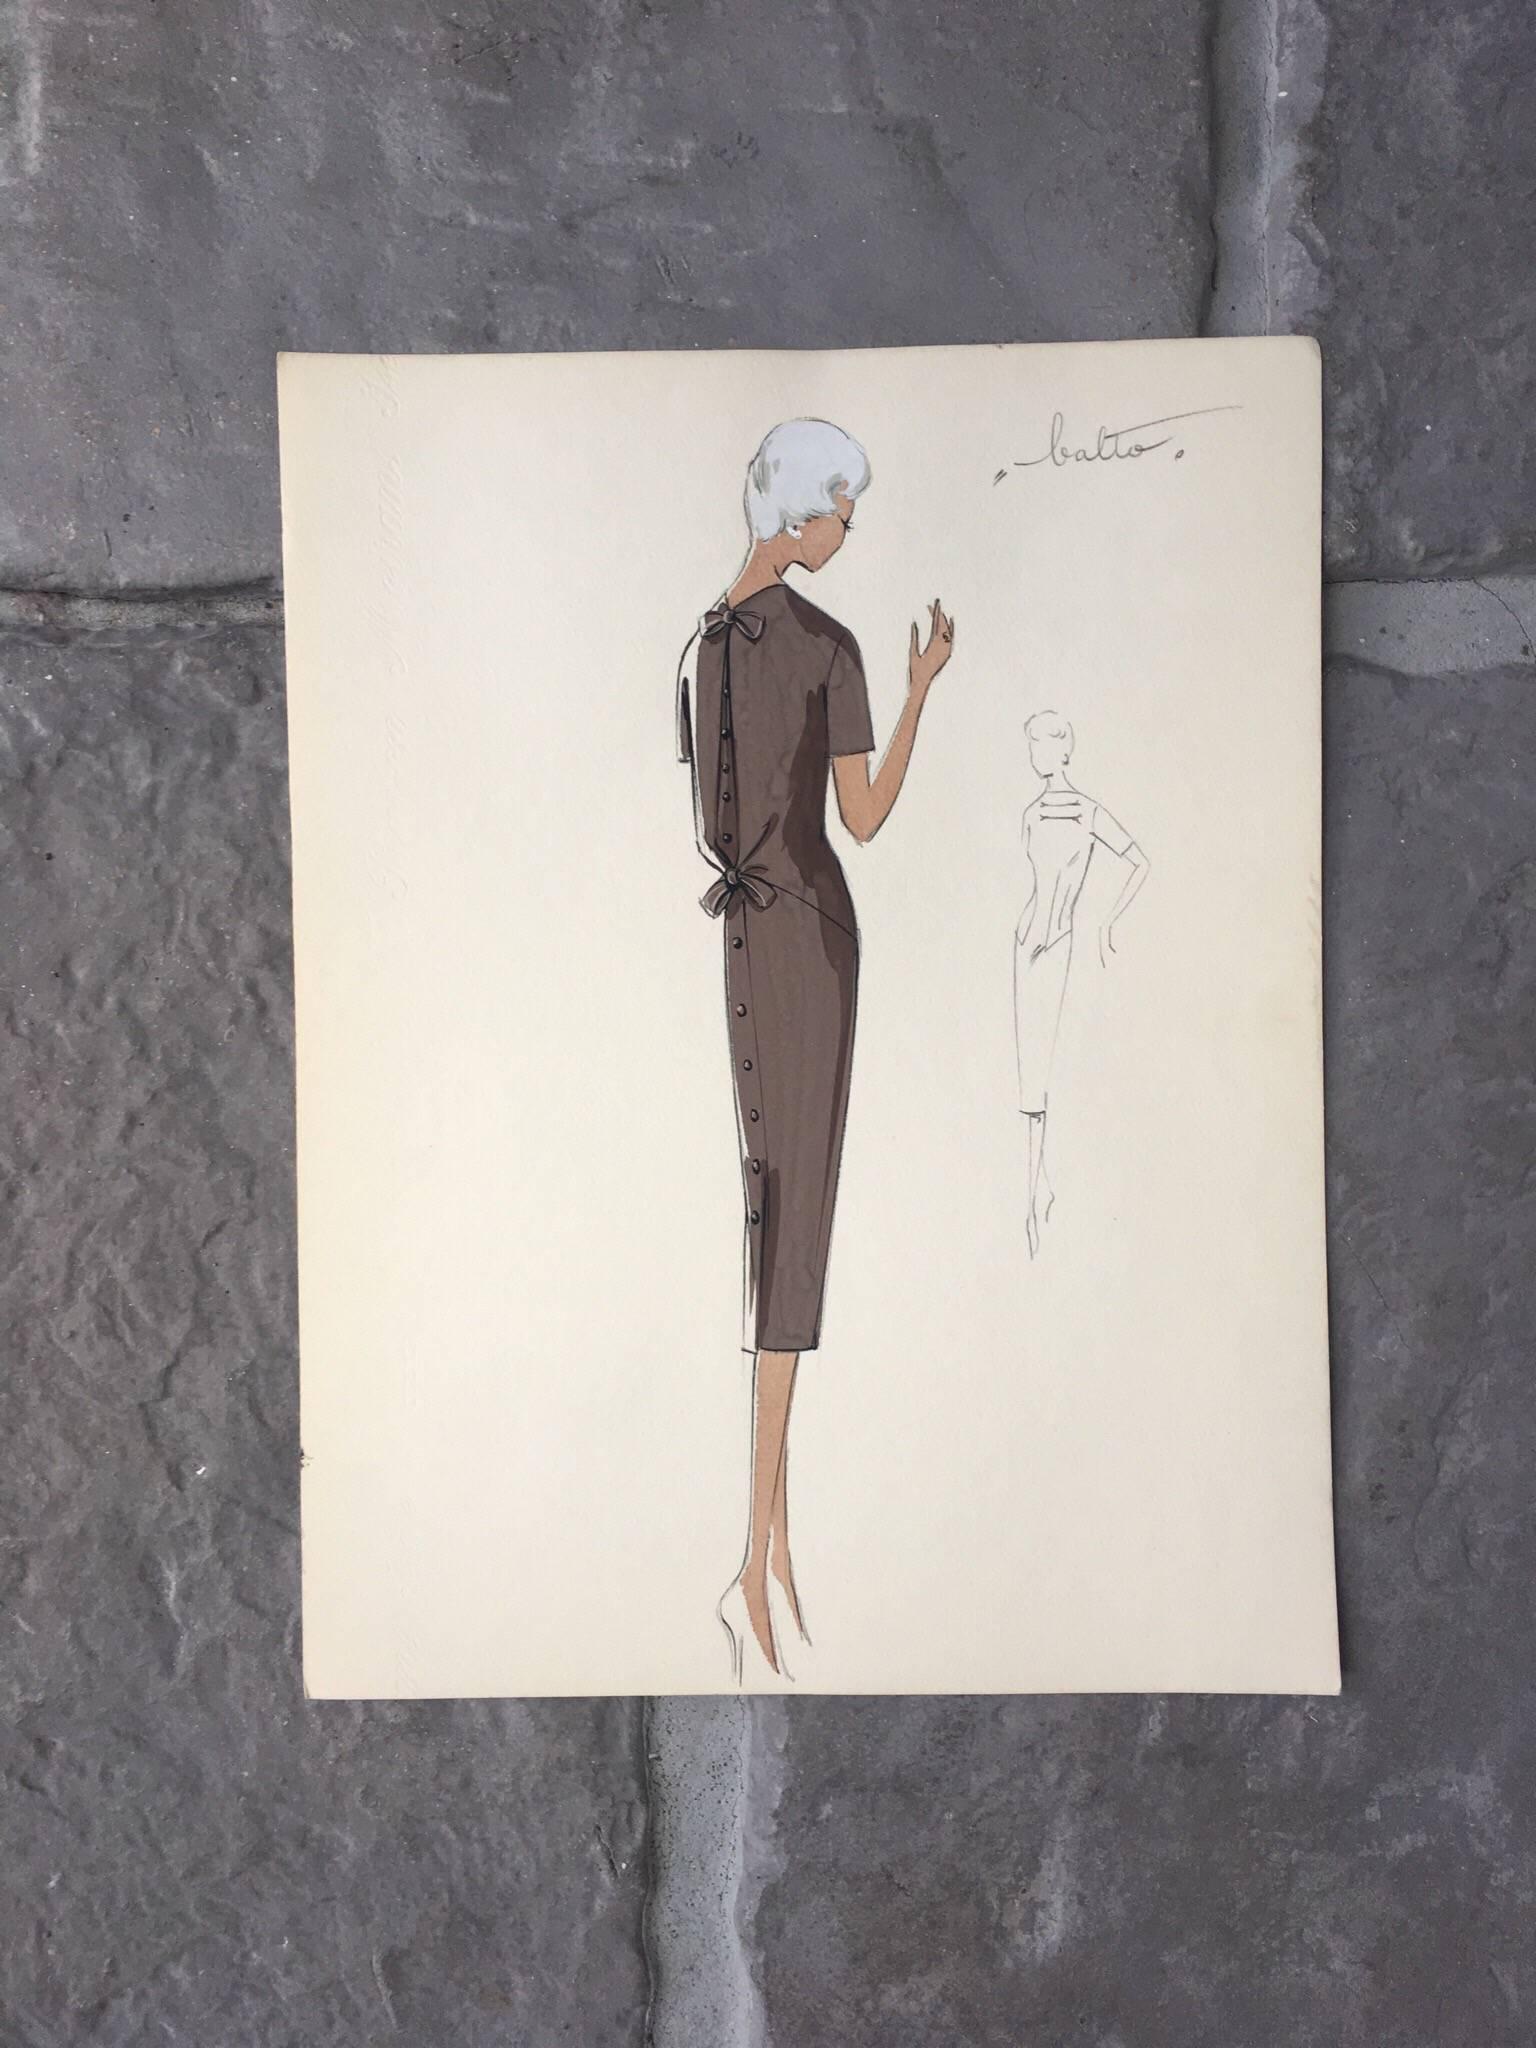 Lady in Elegant 1950's Dress Parisian Fashion Illustration Sketch - Painting by Unknown